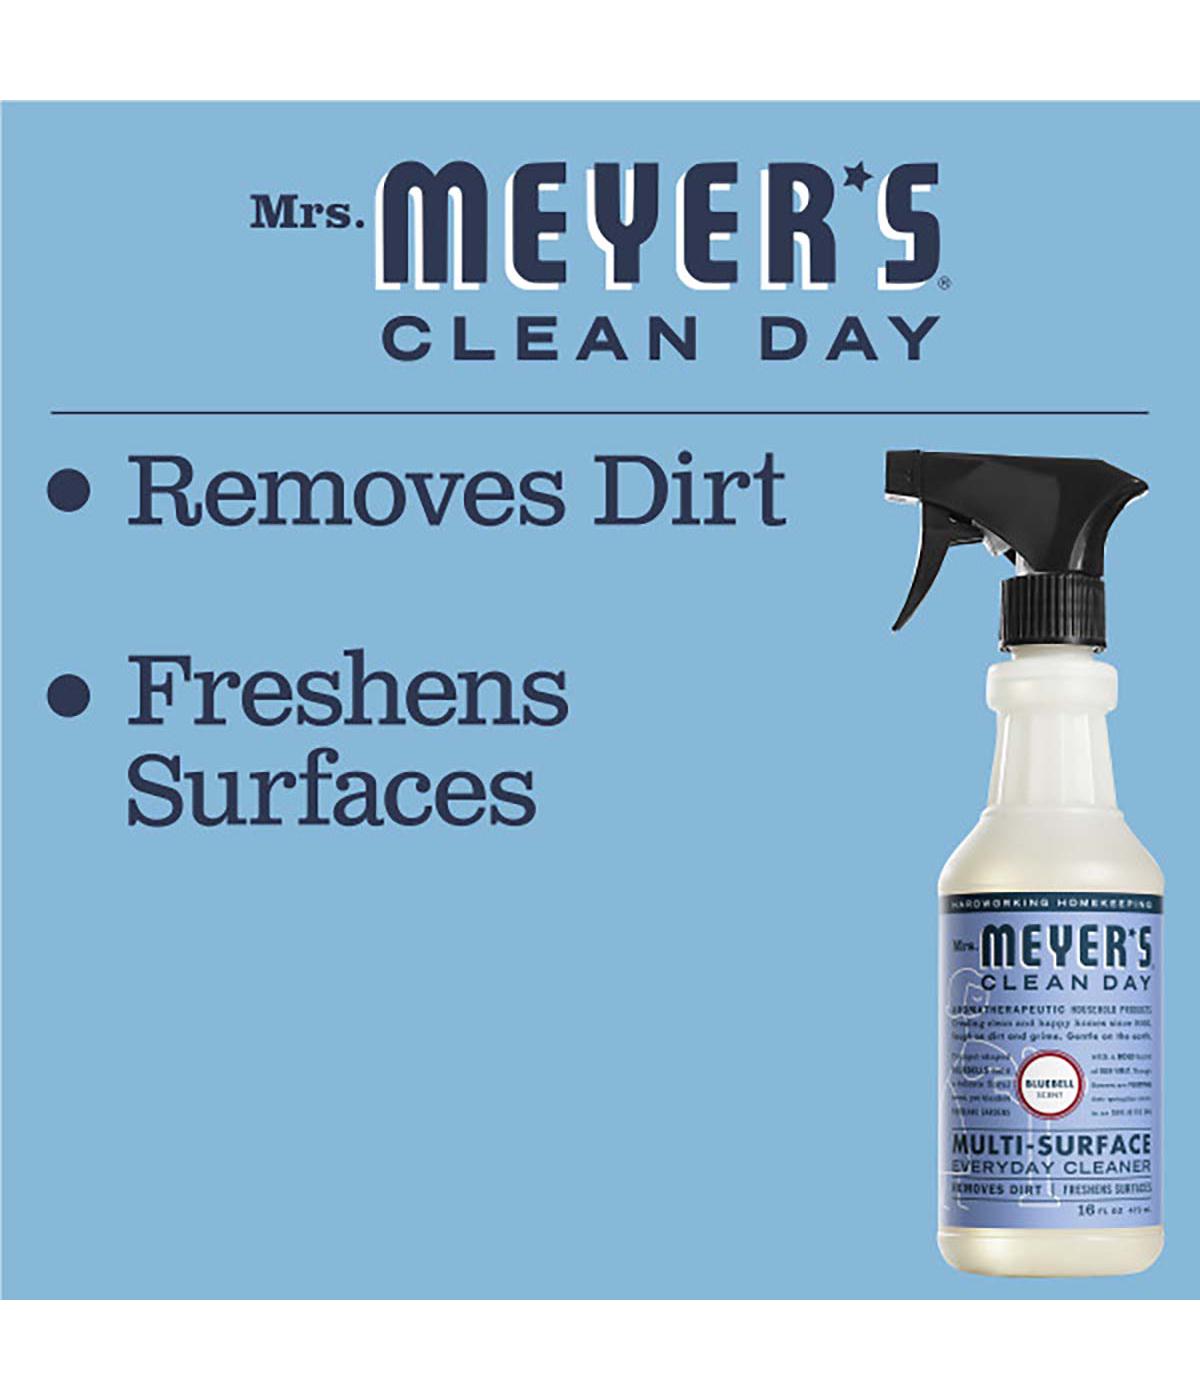 Mrs. Meyer's Clean Day Bluebell Scent Multi-Surface Everyday Cleaner Spray; image 2 of 6